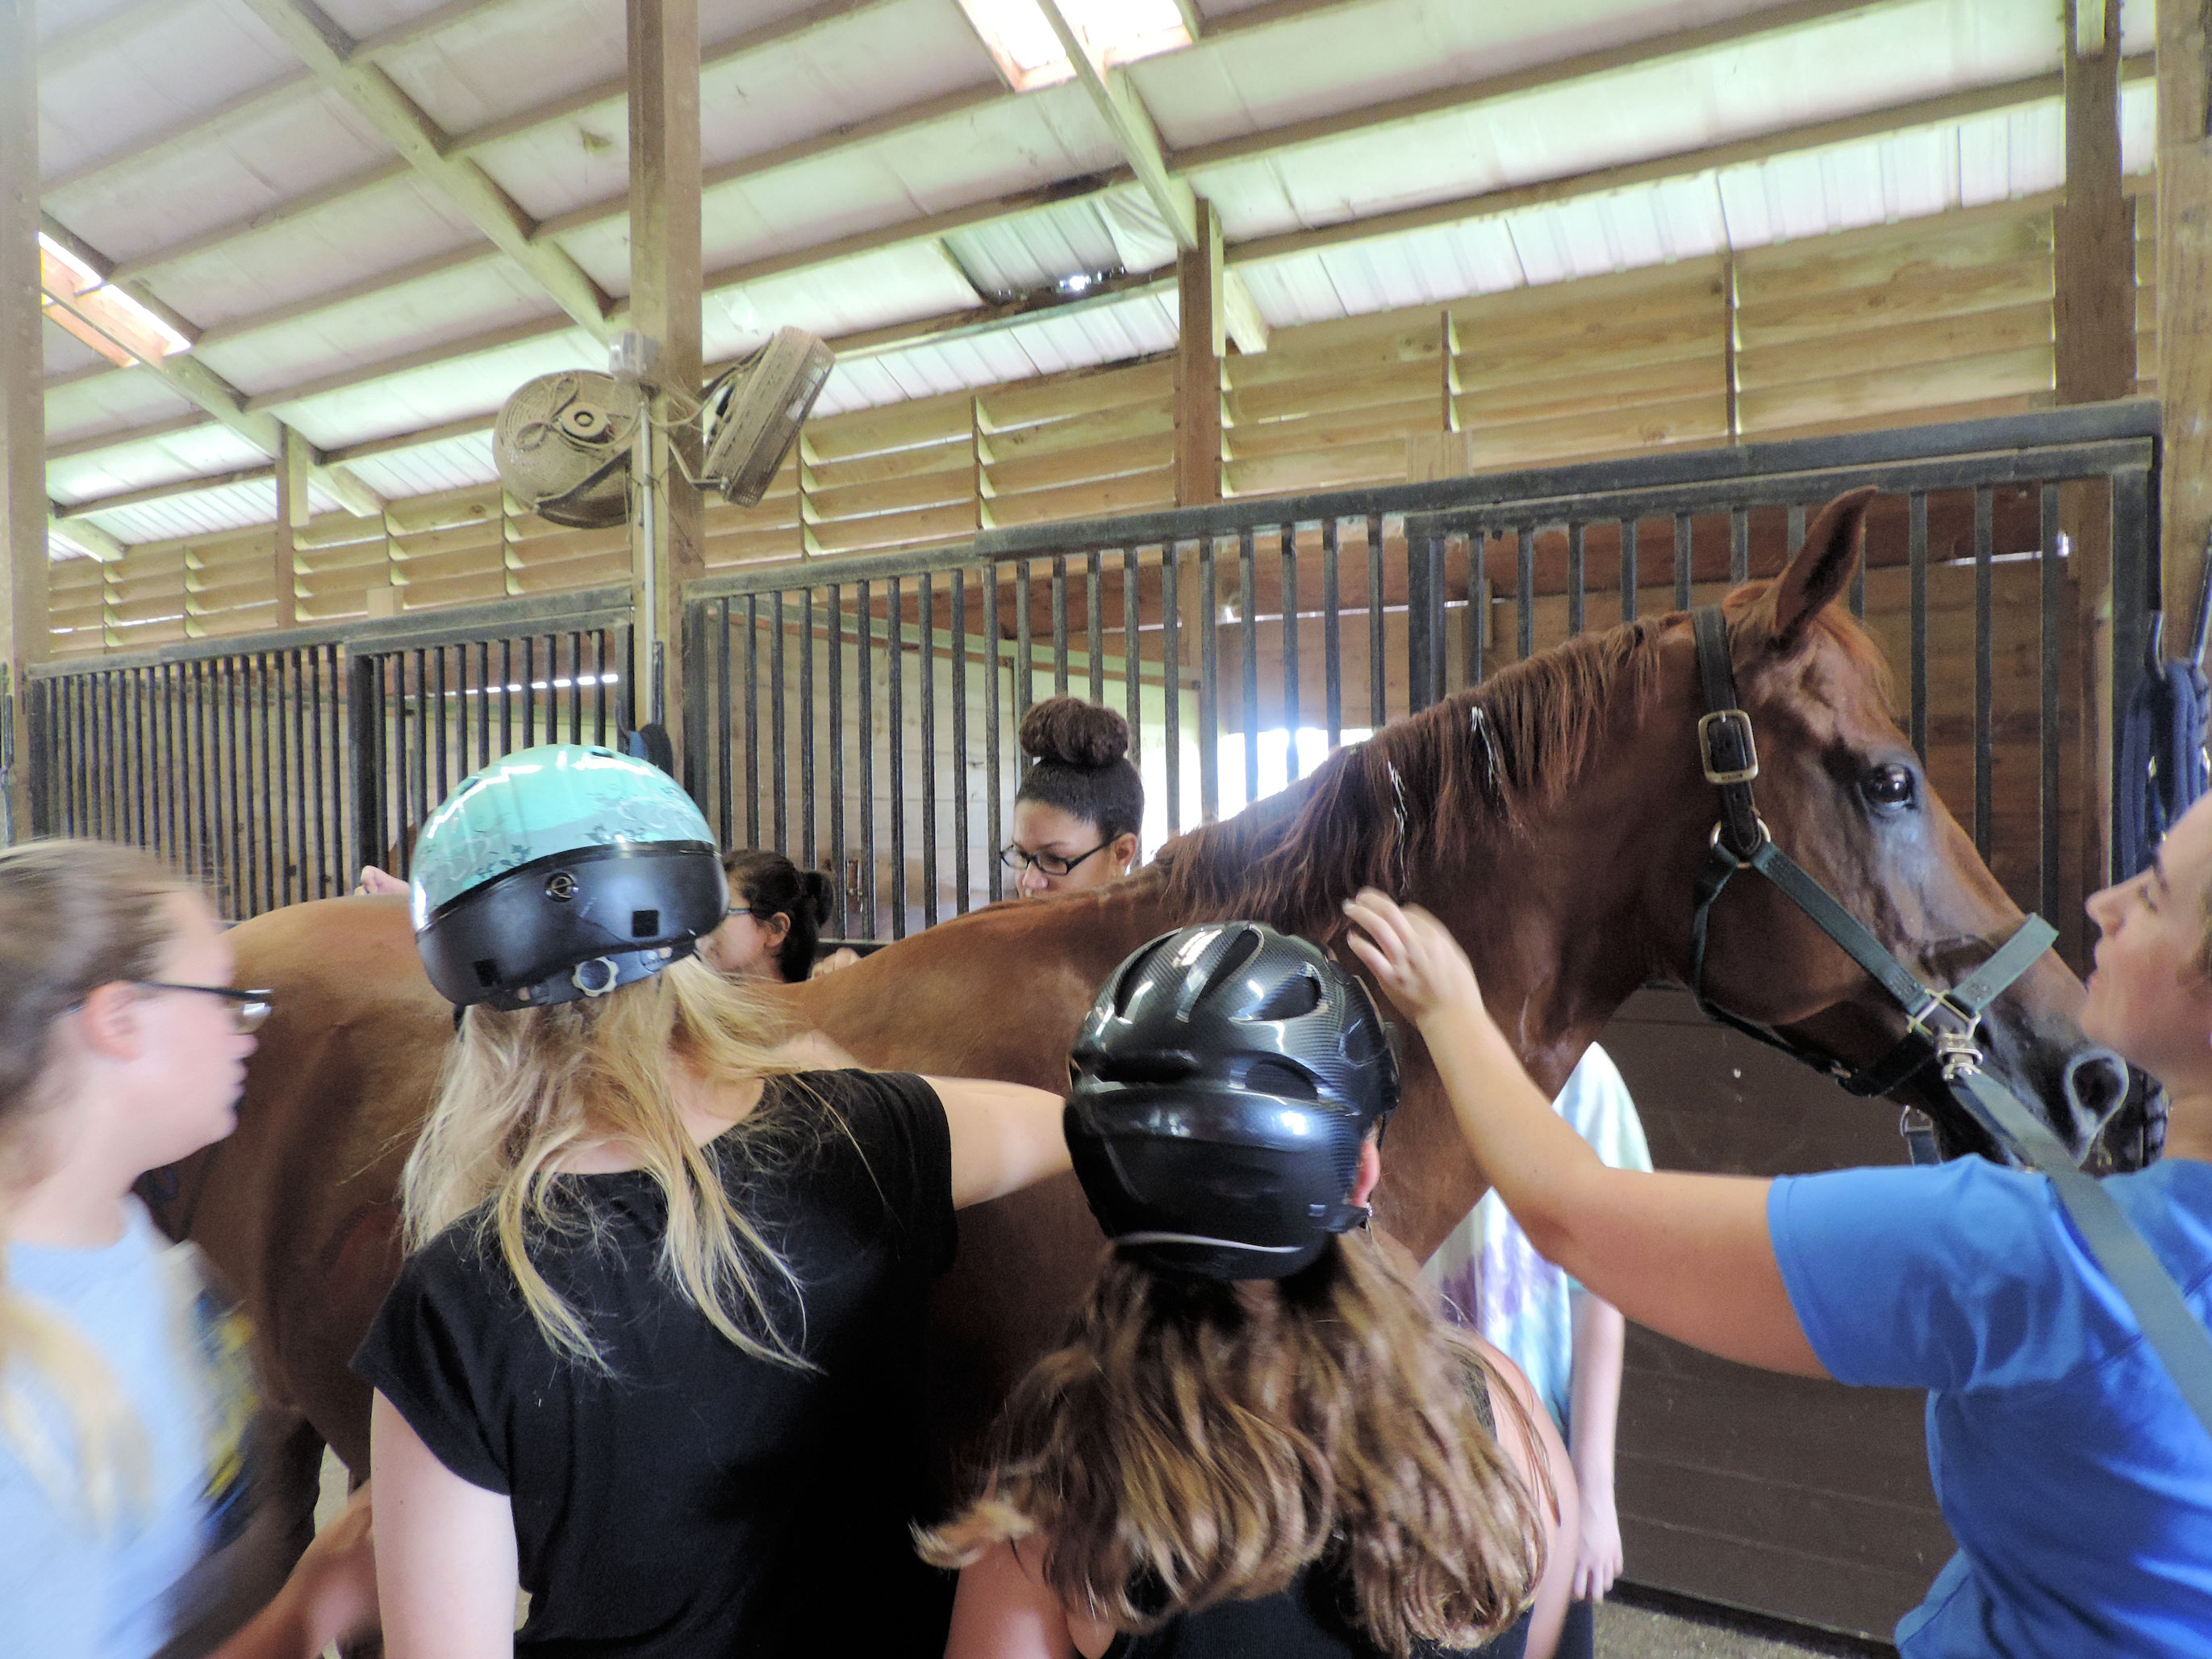 Unmounted horse therapies